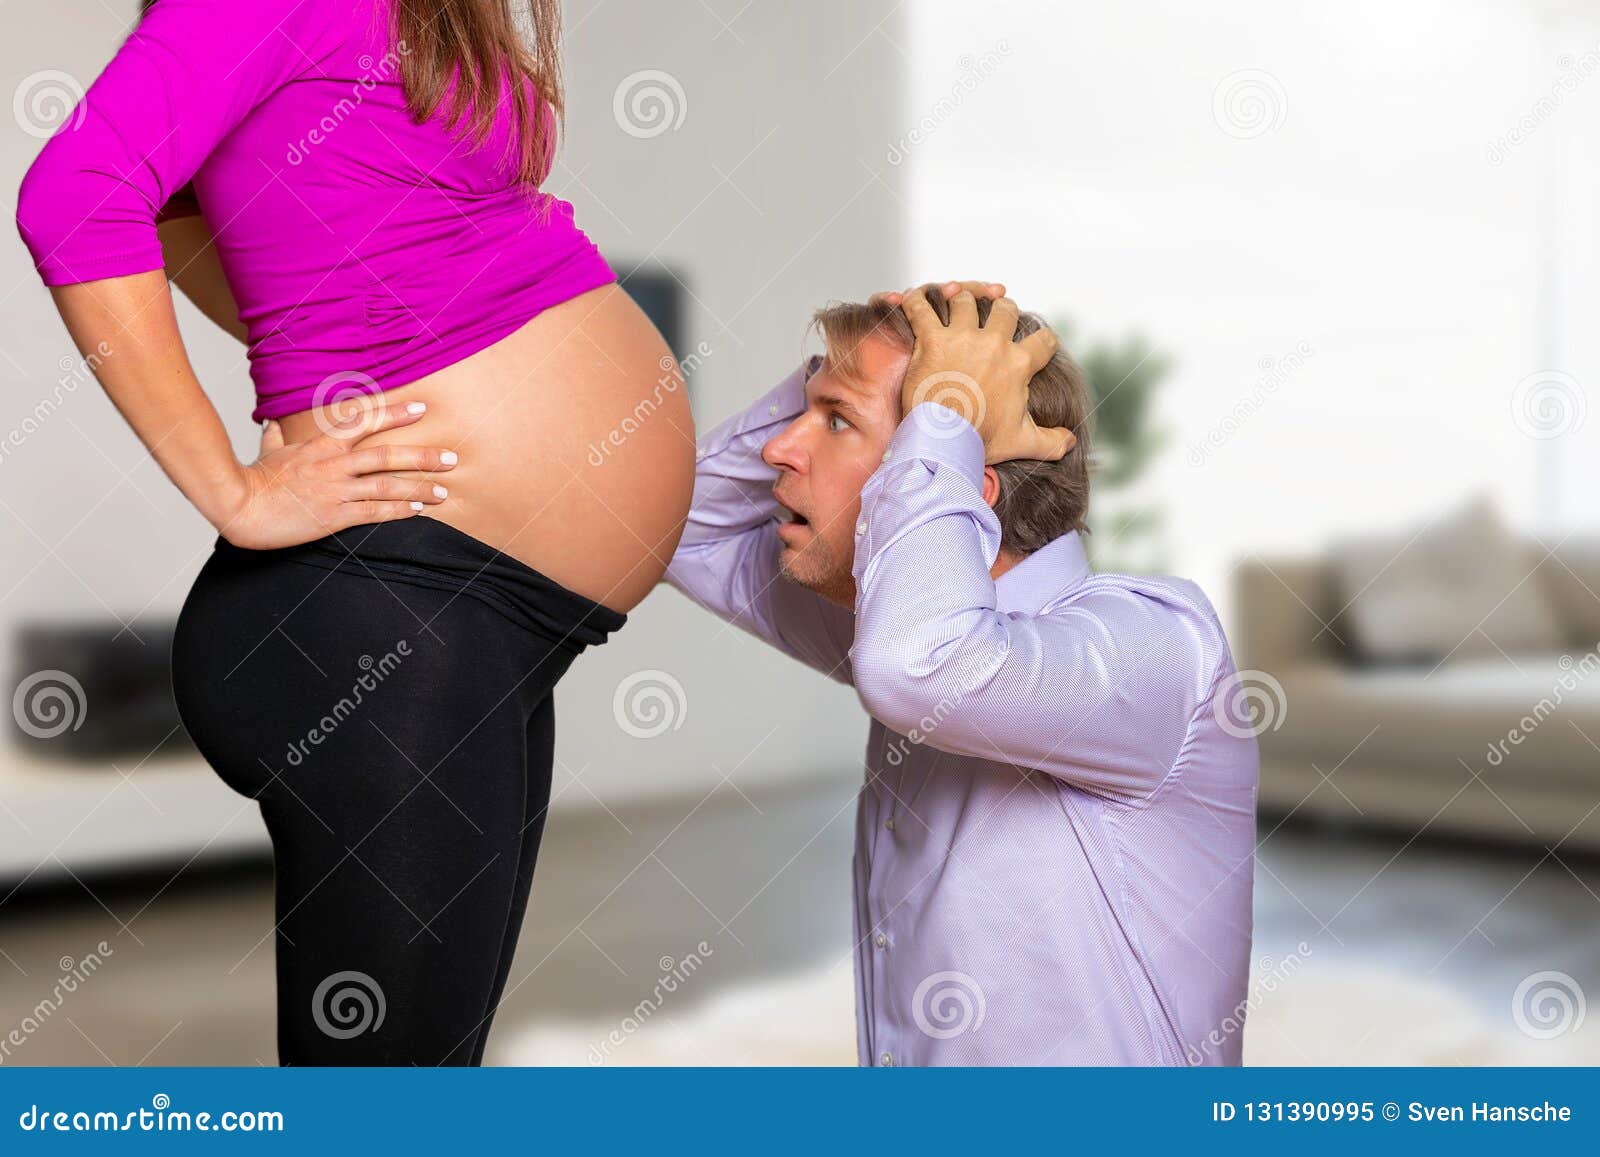 Unwanted Pregnancy Concept Stock Image Image Of Hopelessness 131390